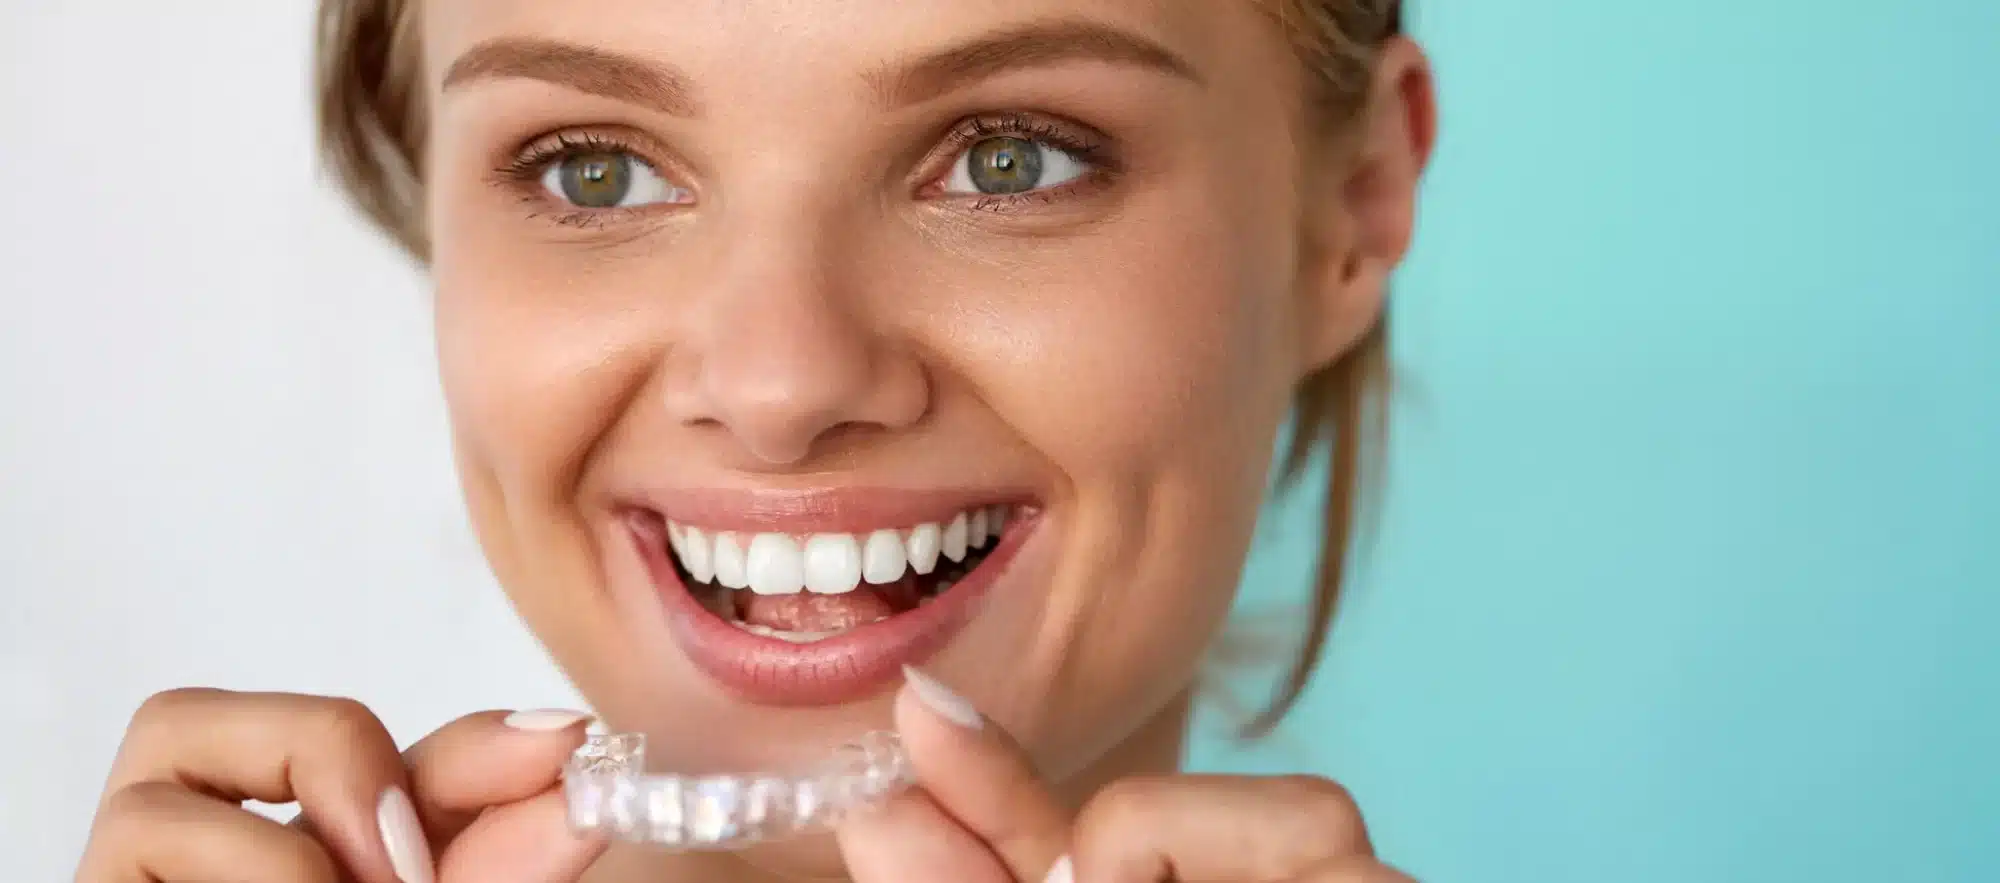 Timeline for Teeth Straightening with Dental Braces